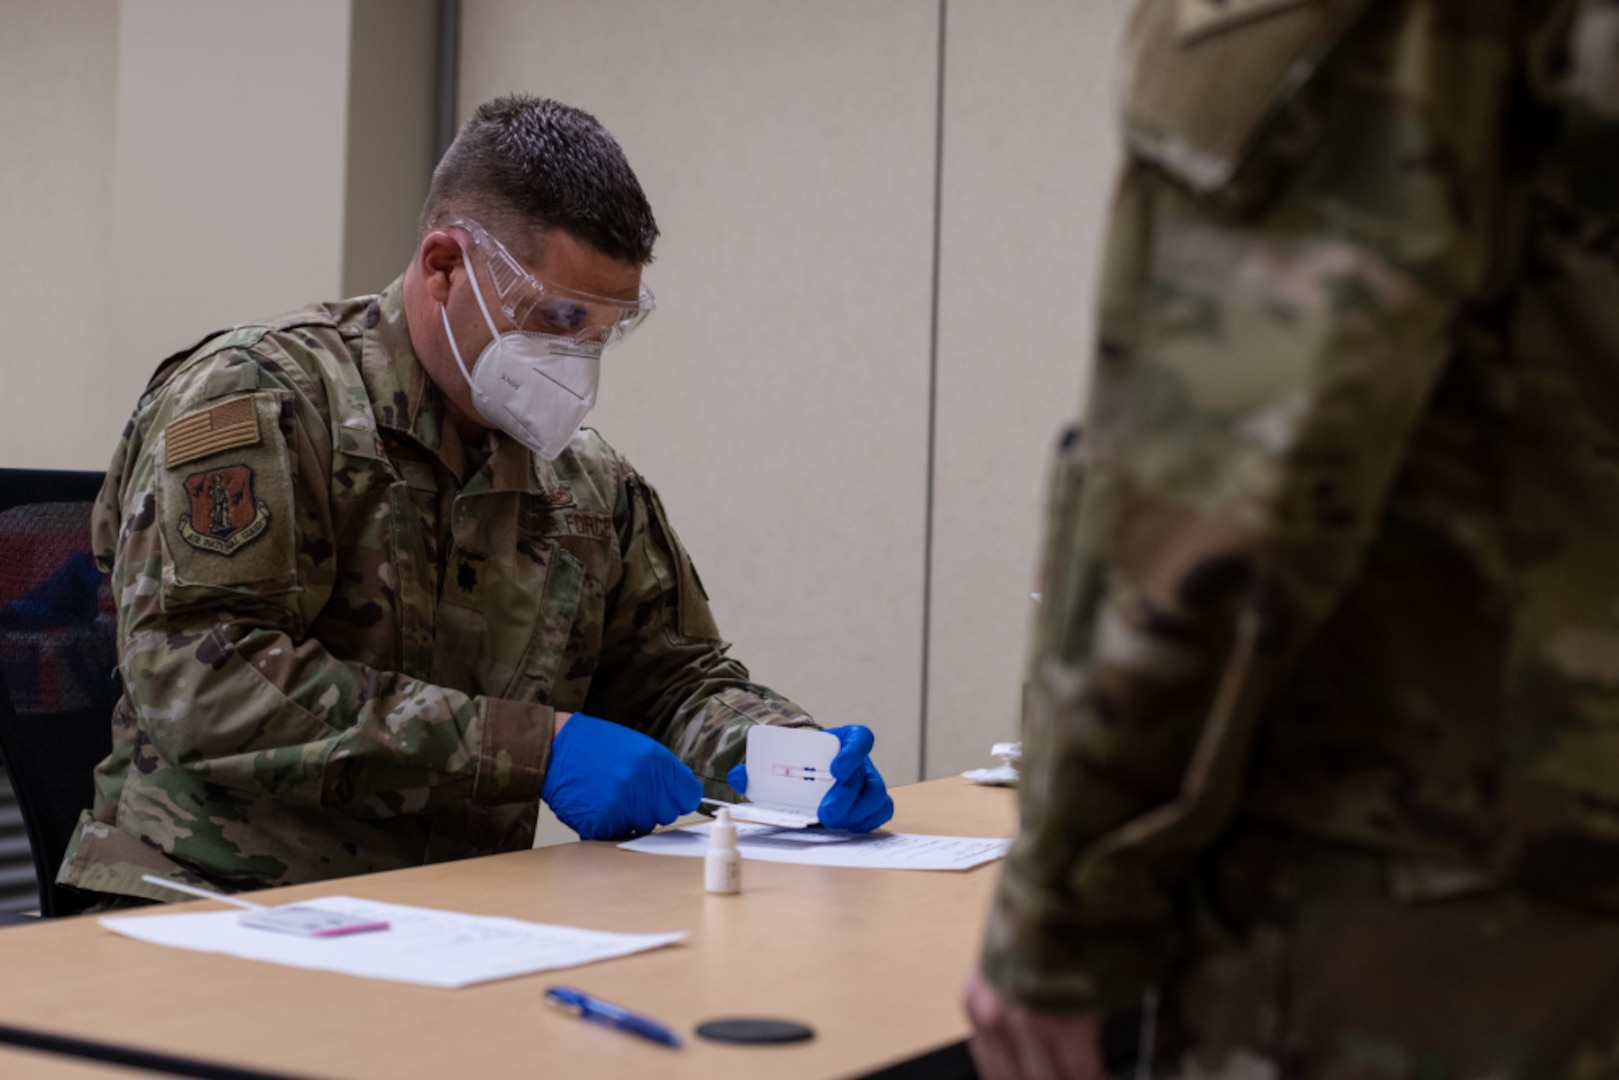 A military member in uniform and personal protective equipment works with equipment on a table.